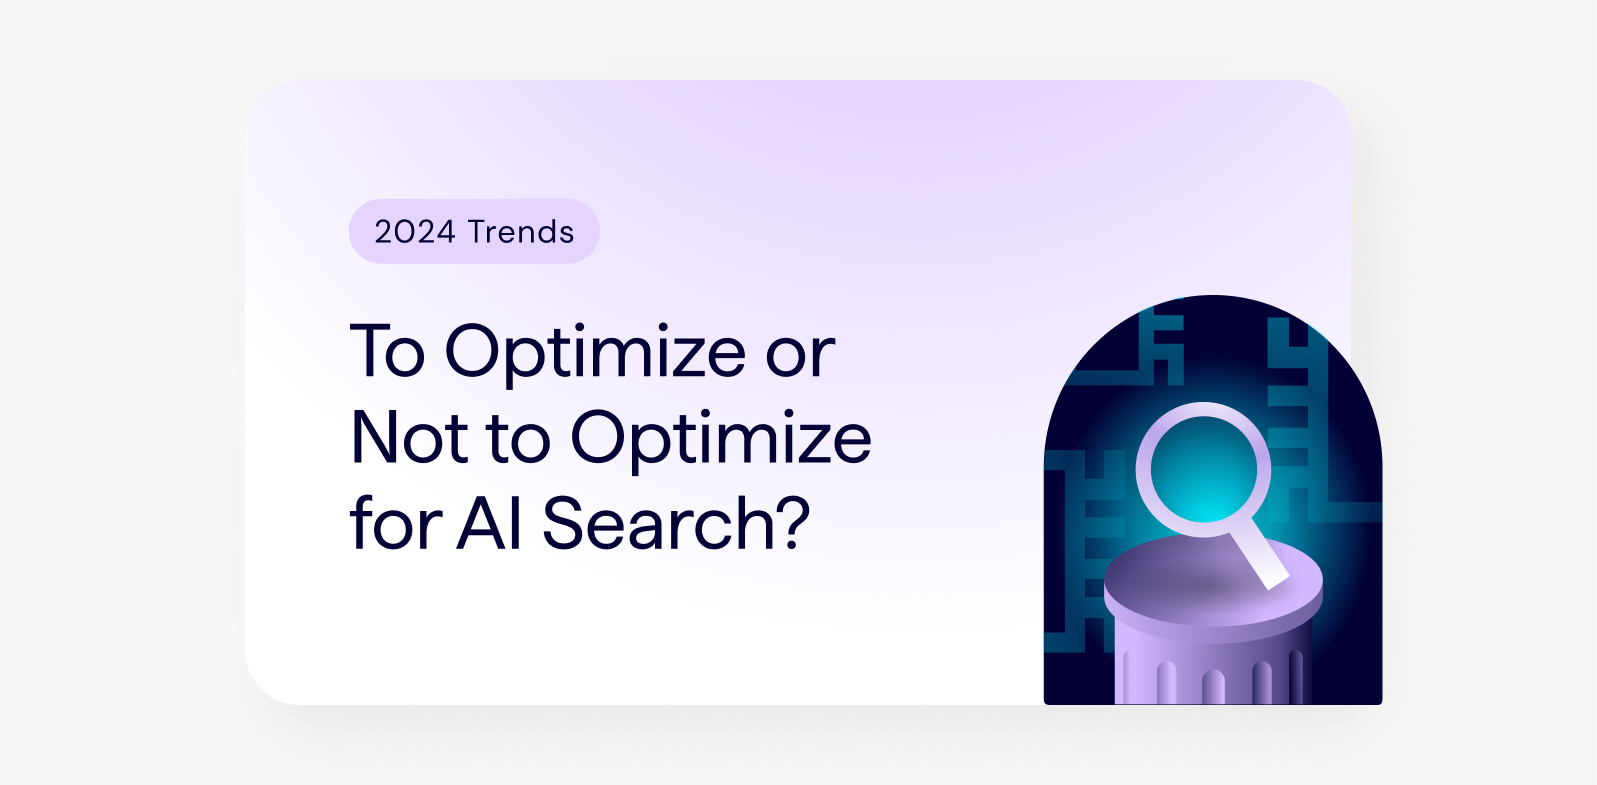 2024 SEO Trends - To Optimize or Not to Optimize for AI Search?